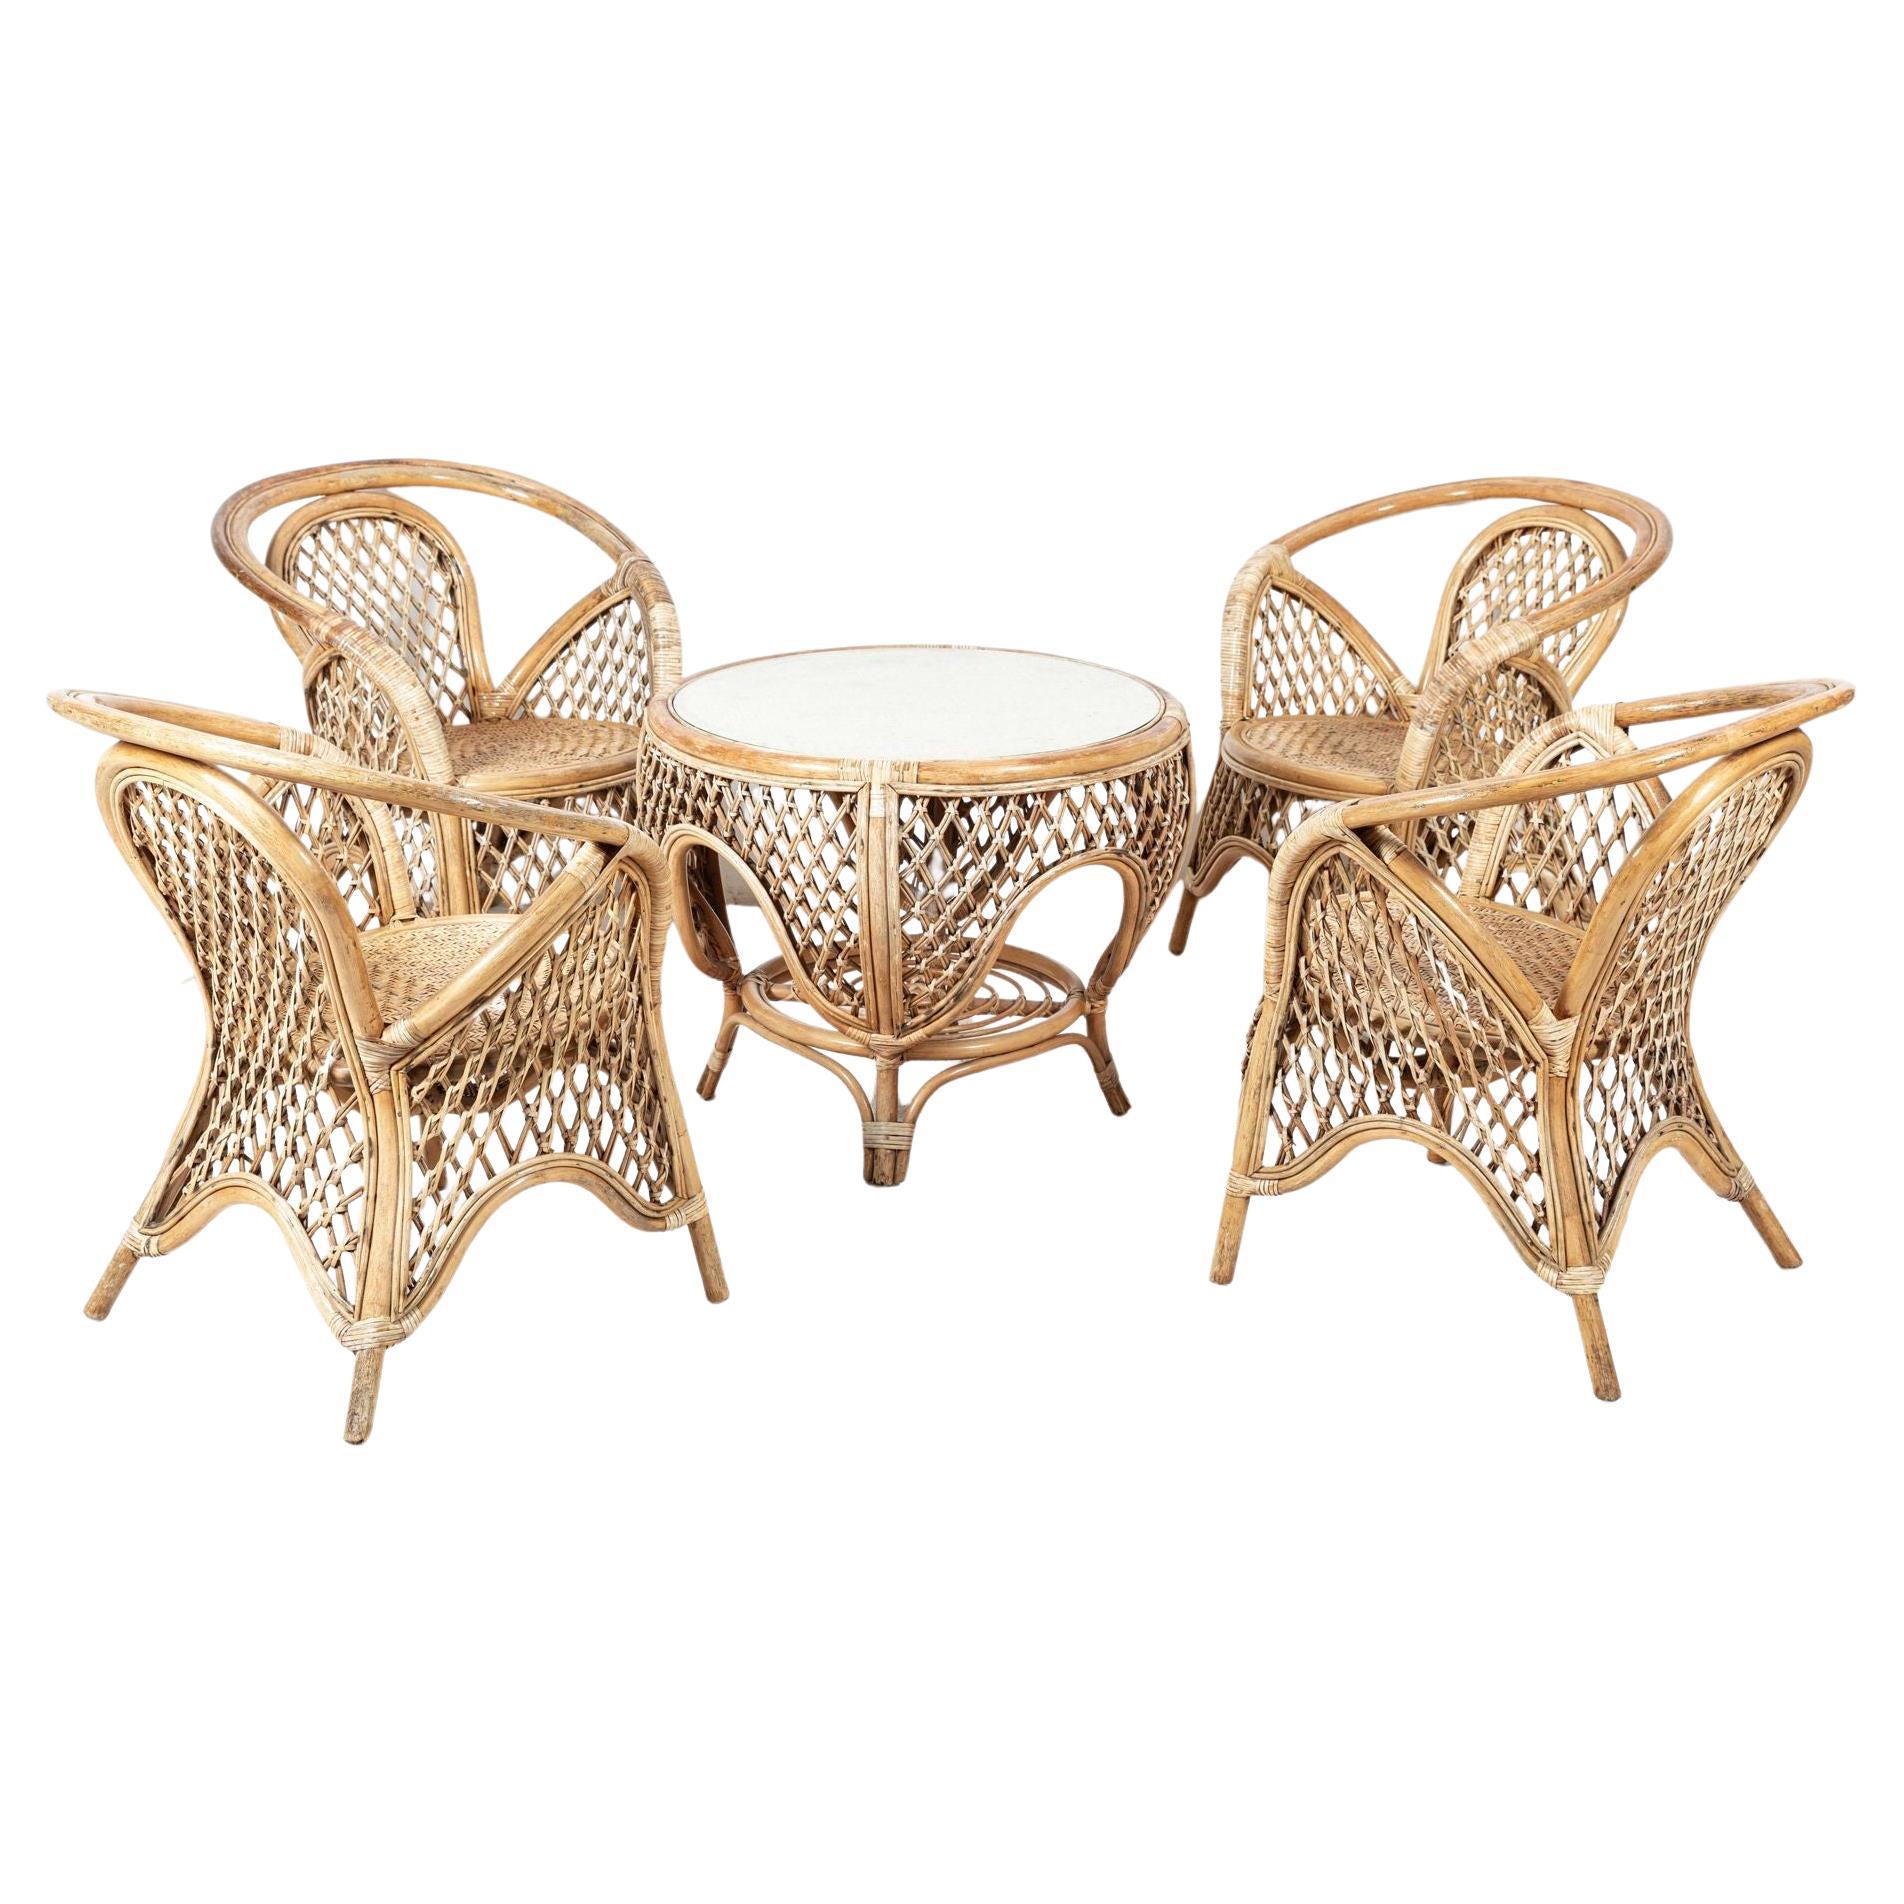 Mid Century English Cane/Wicker Conservatory Set For Sale